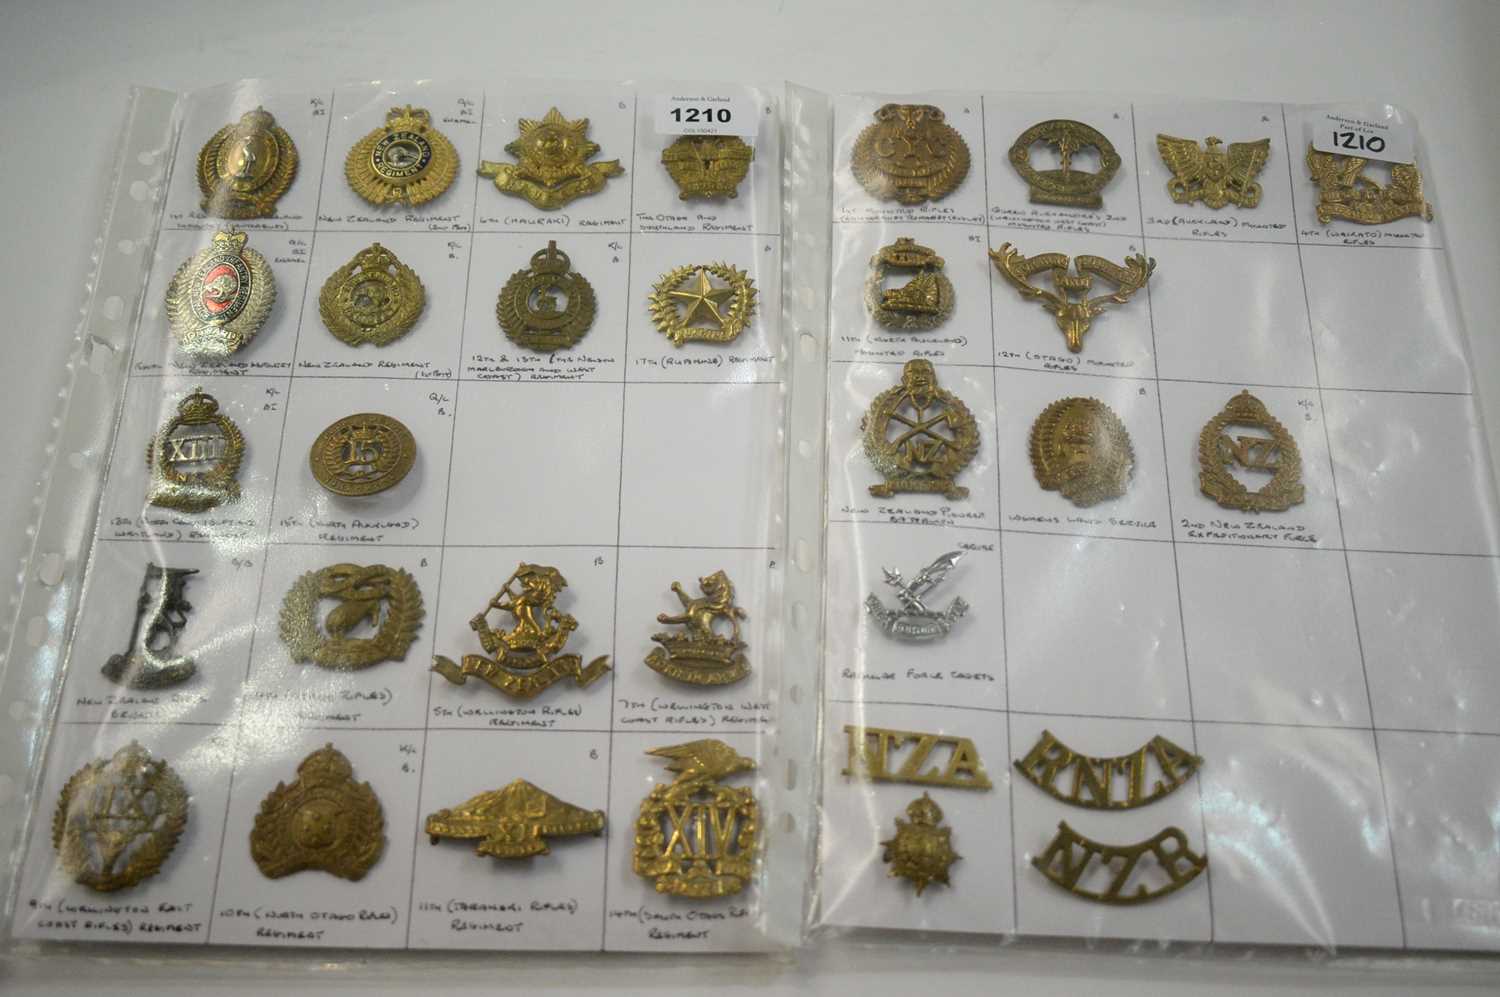 Lot 1210 - A collection of 32 New Zealand cap badges.